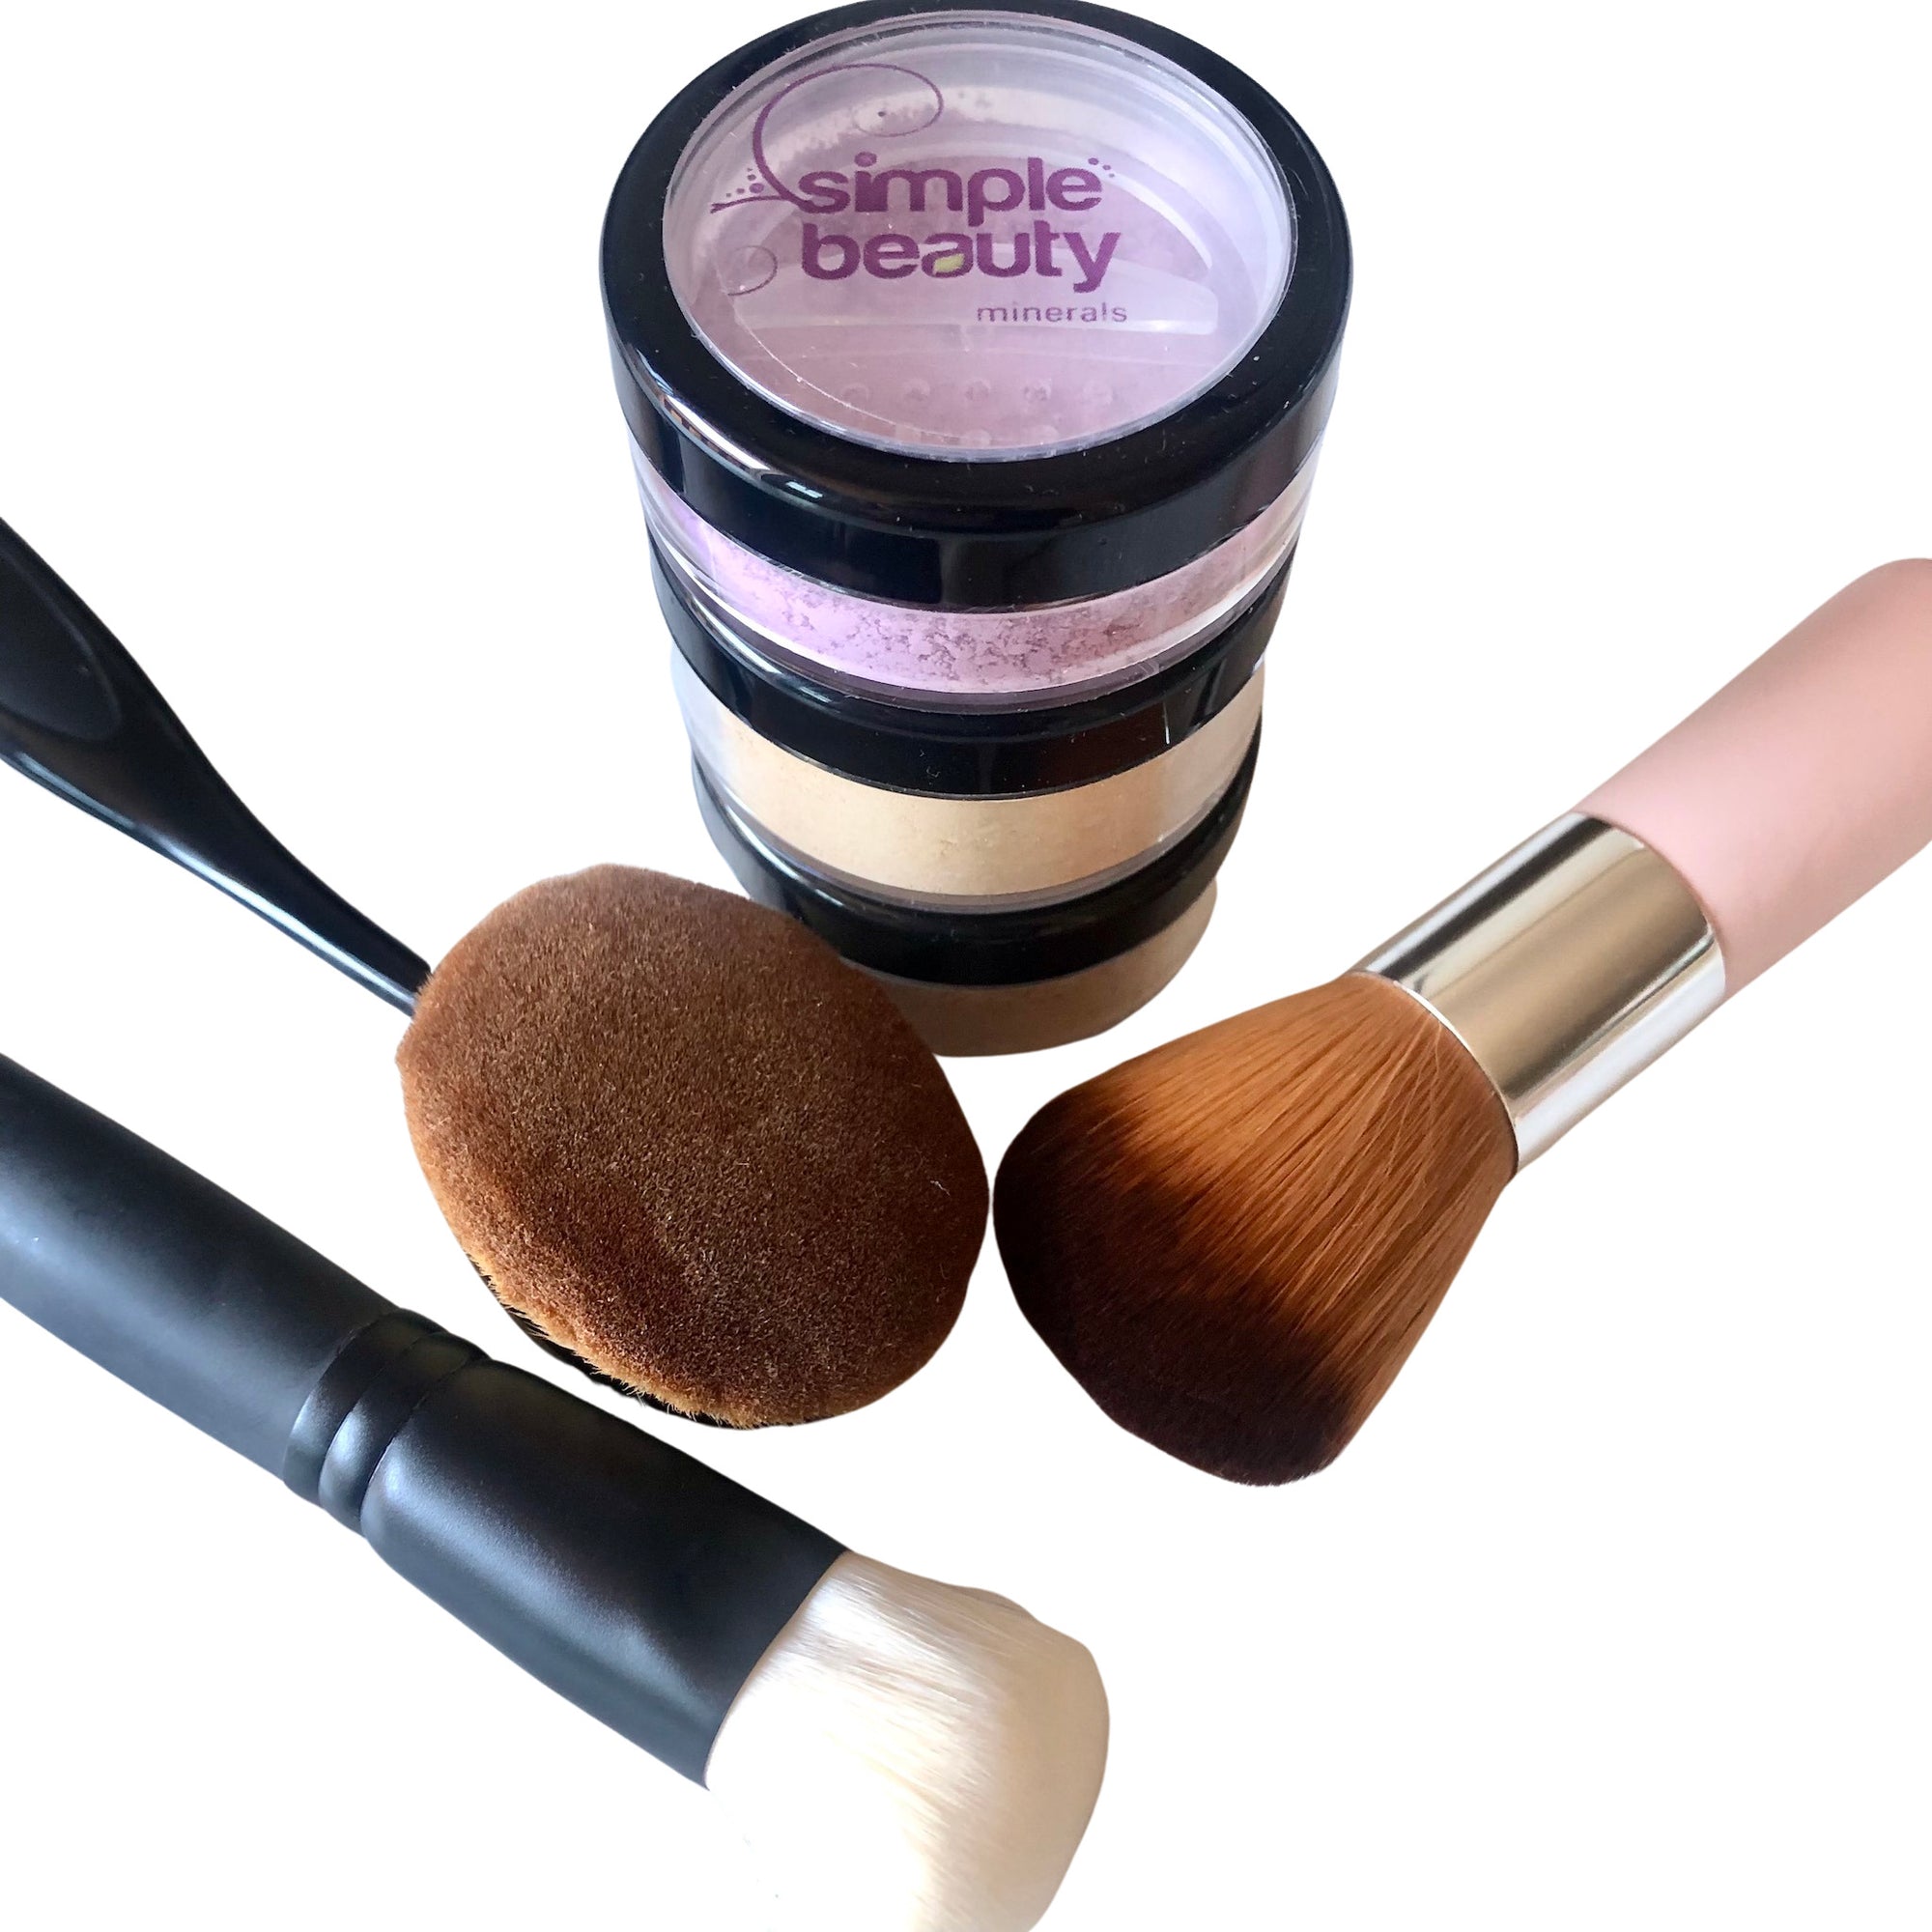 3 pots of mineral makeup and 3 brushes